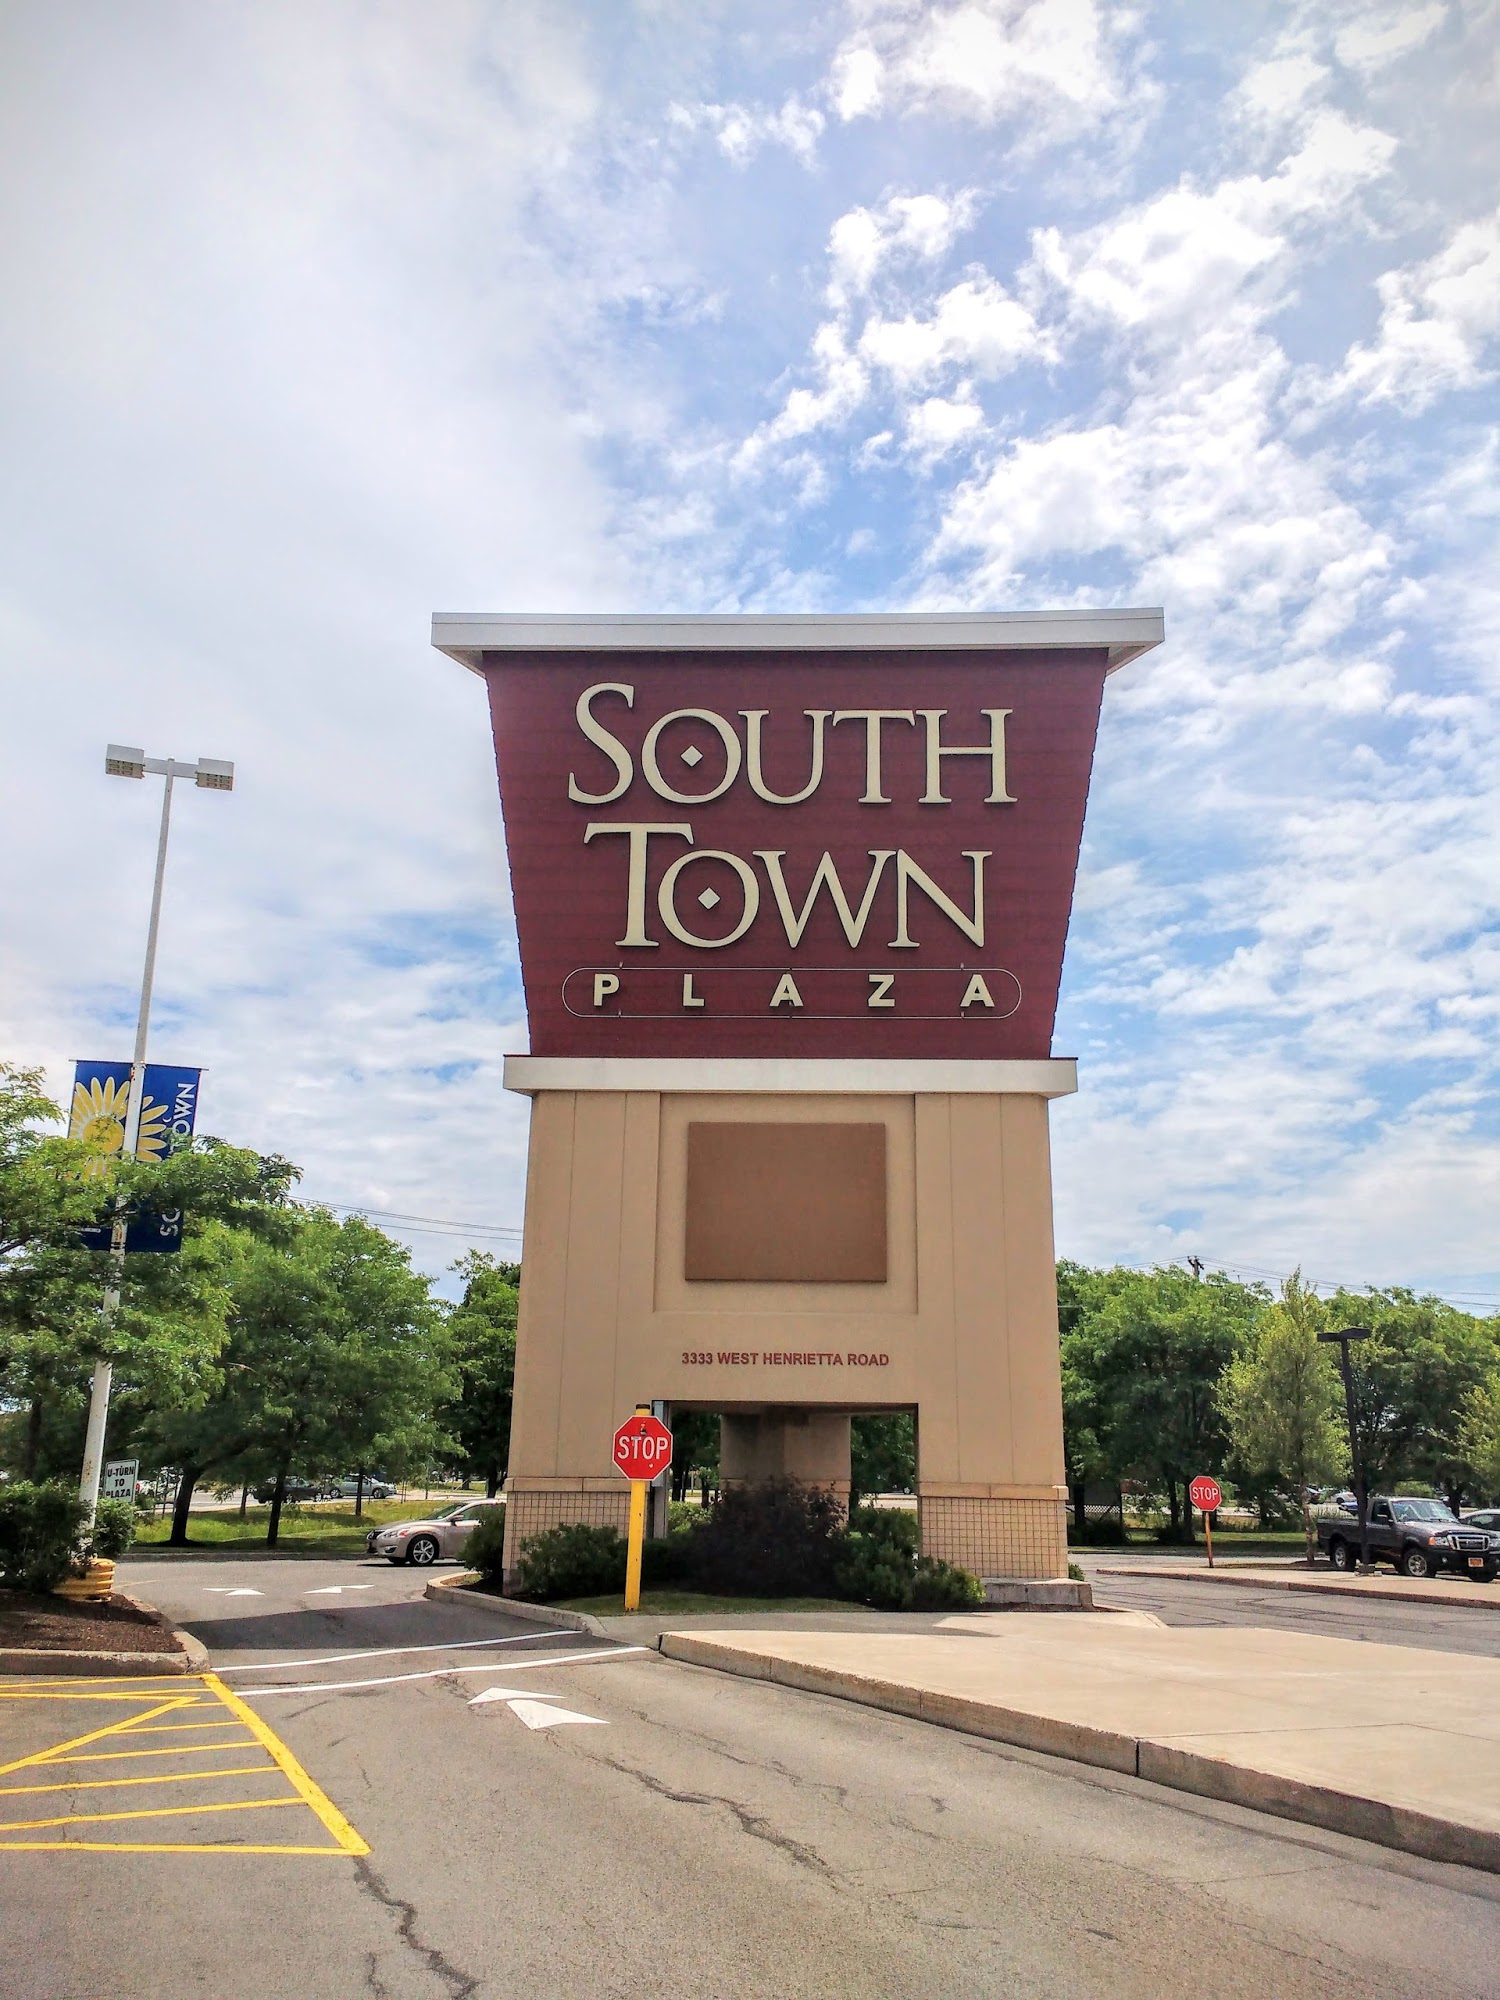 South Town Plaza